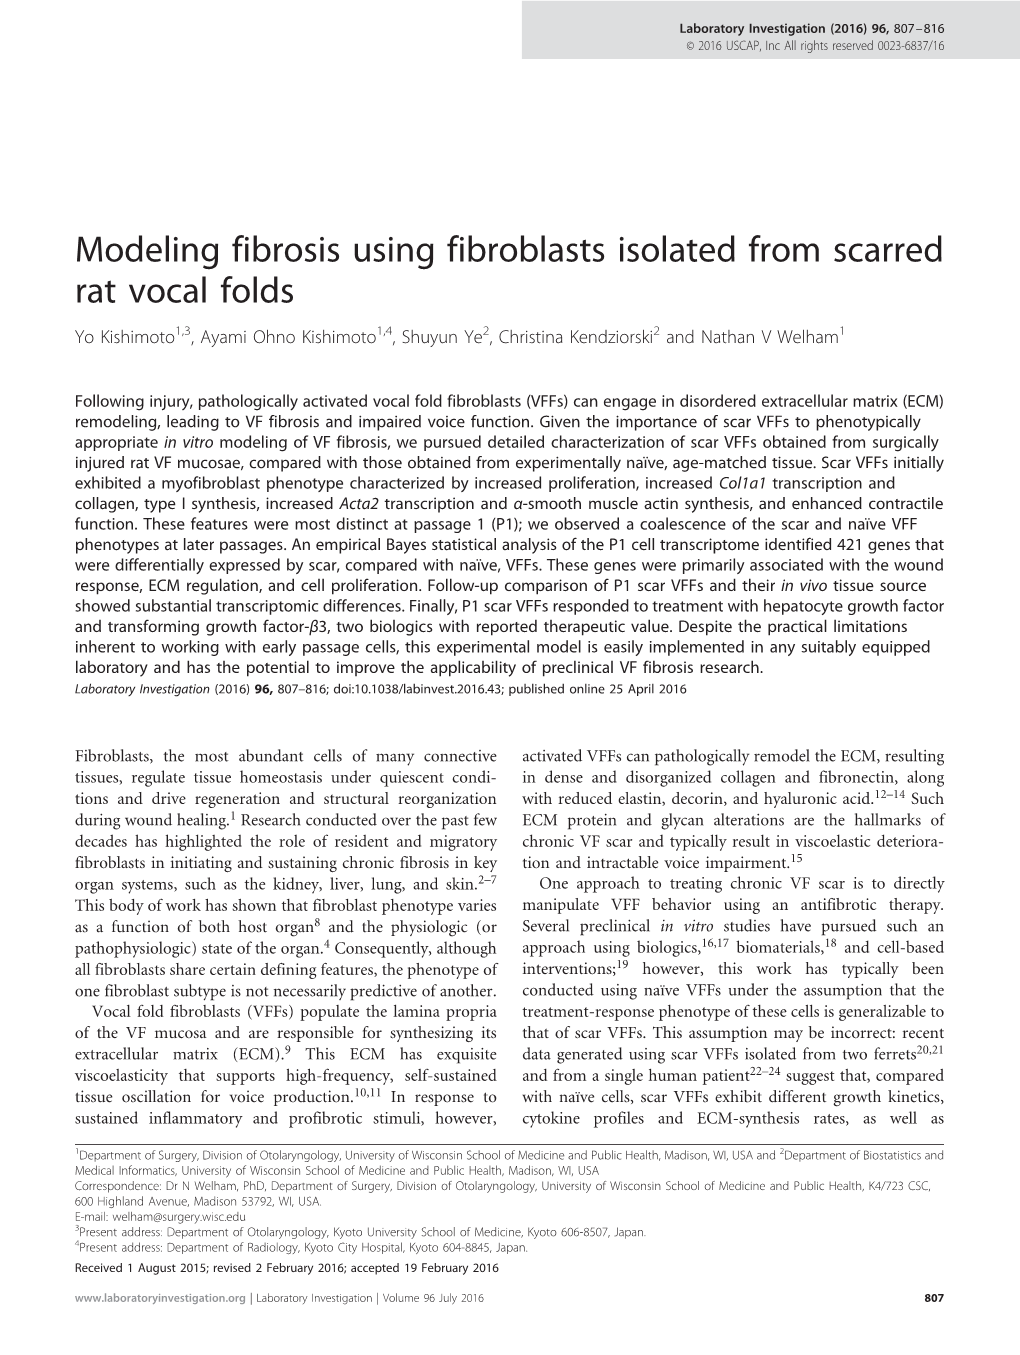 Modeling Fibrosis Using Fibroblasts Isolated from Scarred Rat Vocal Folds